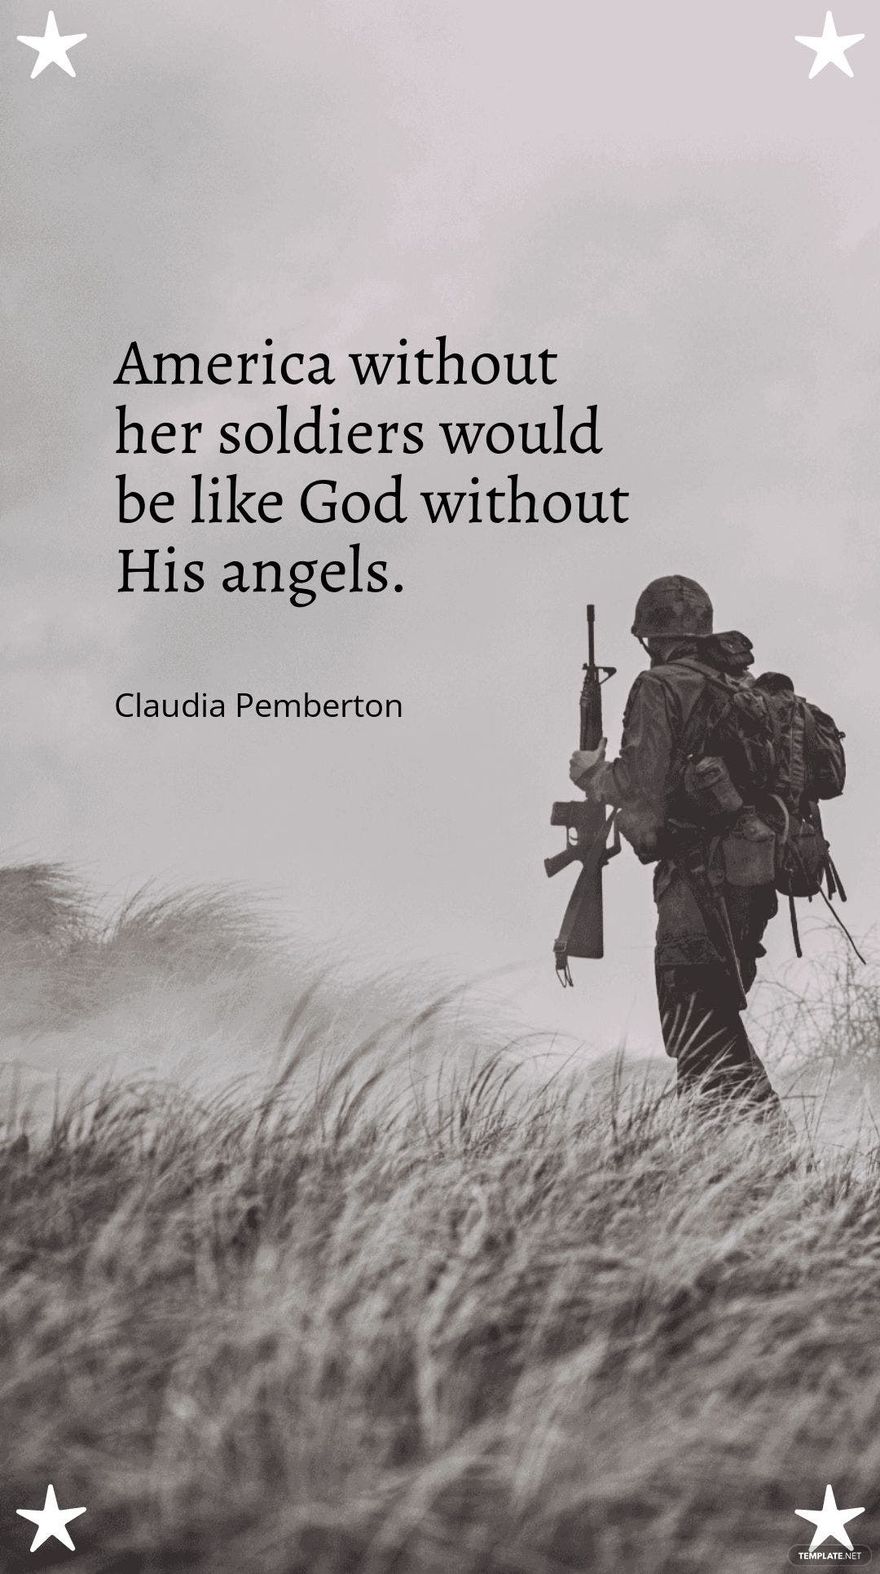 Claudia Pemberton - “America without her soldiers would be like God without His angels.”